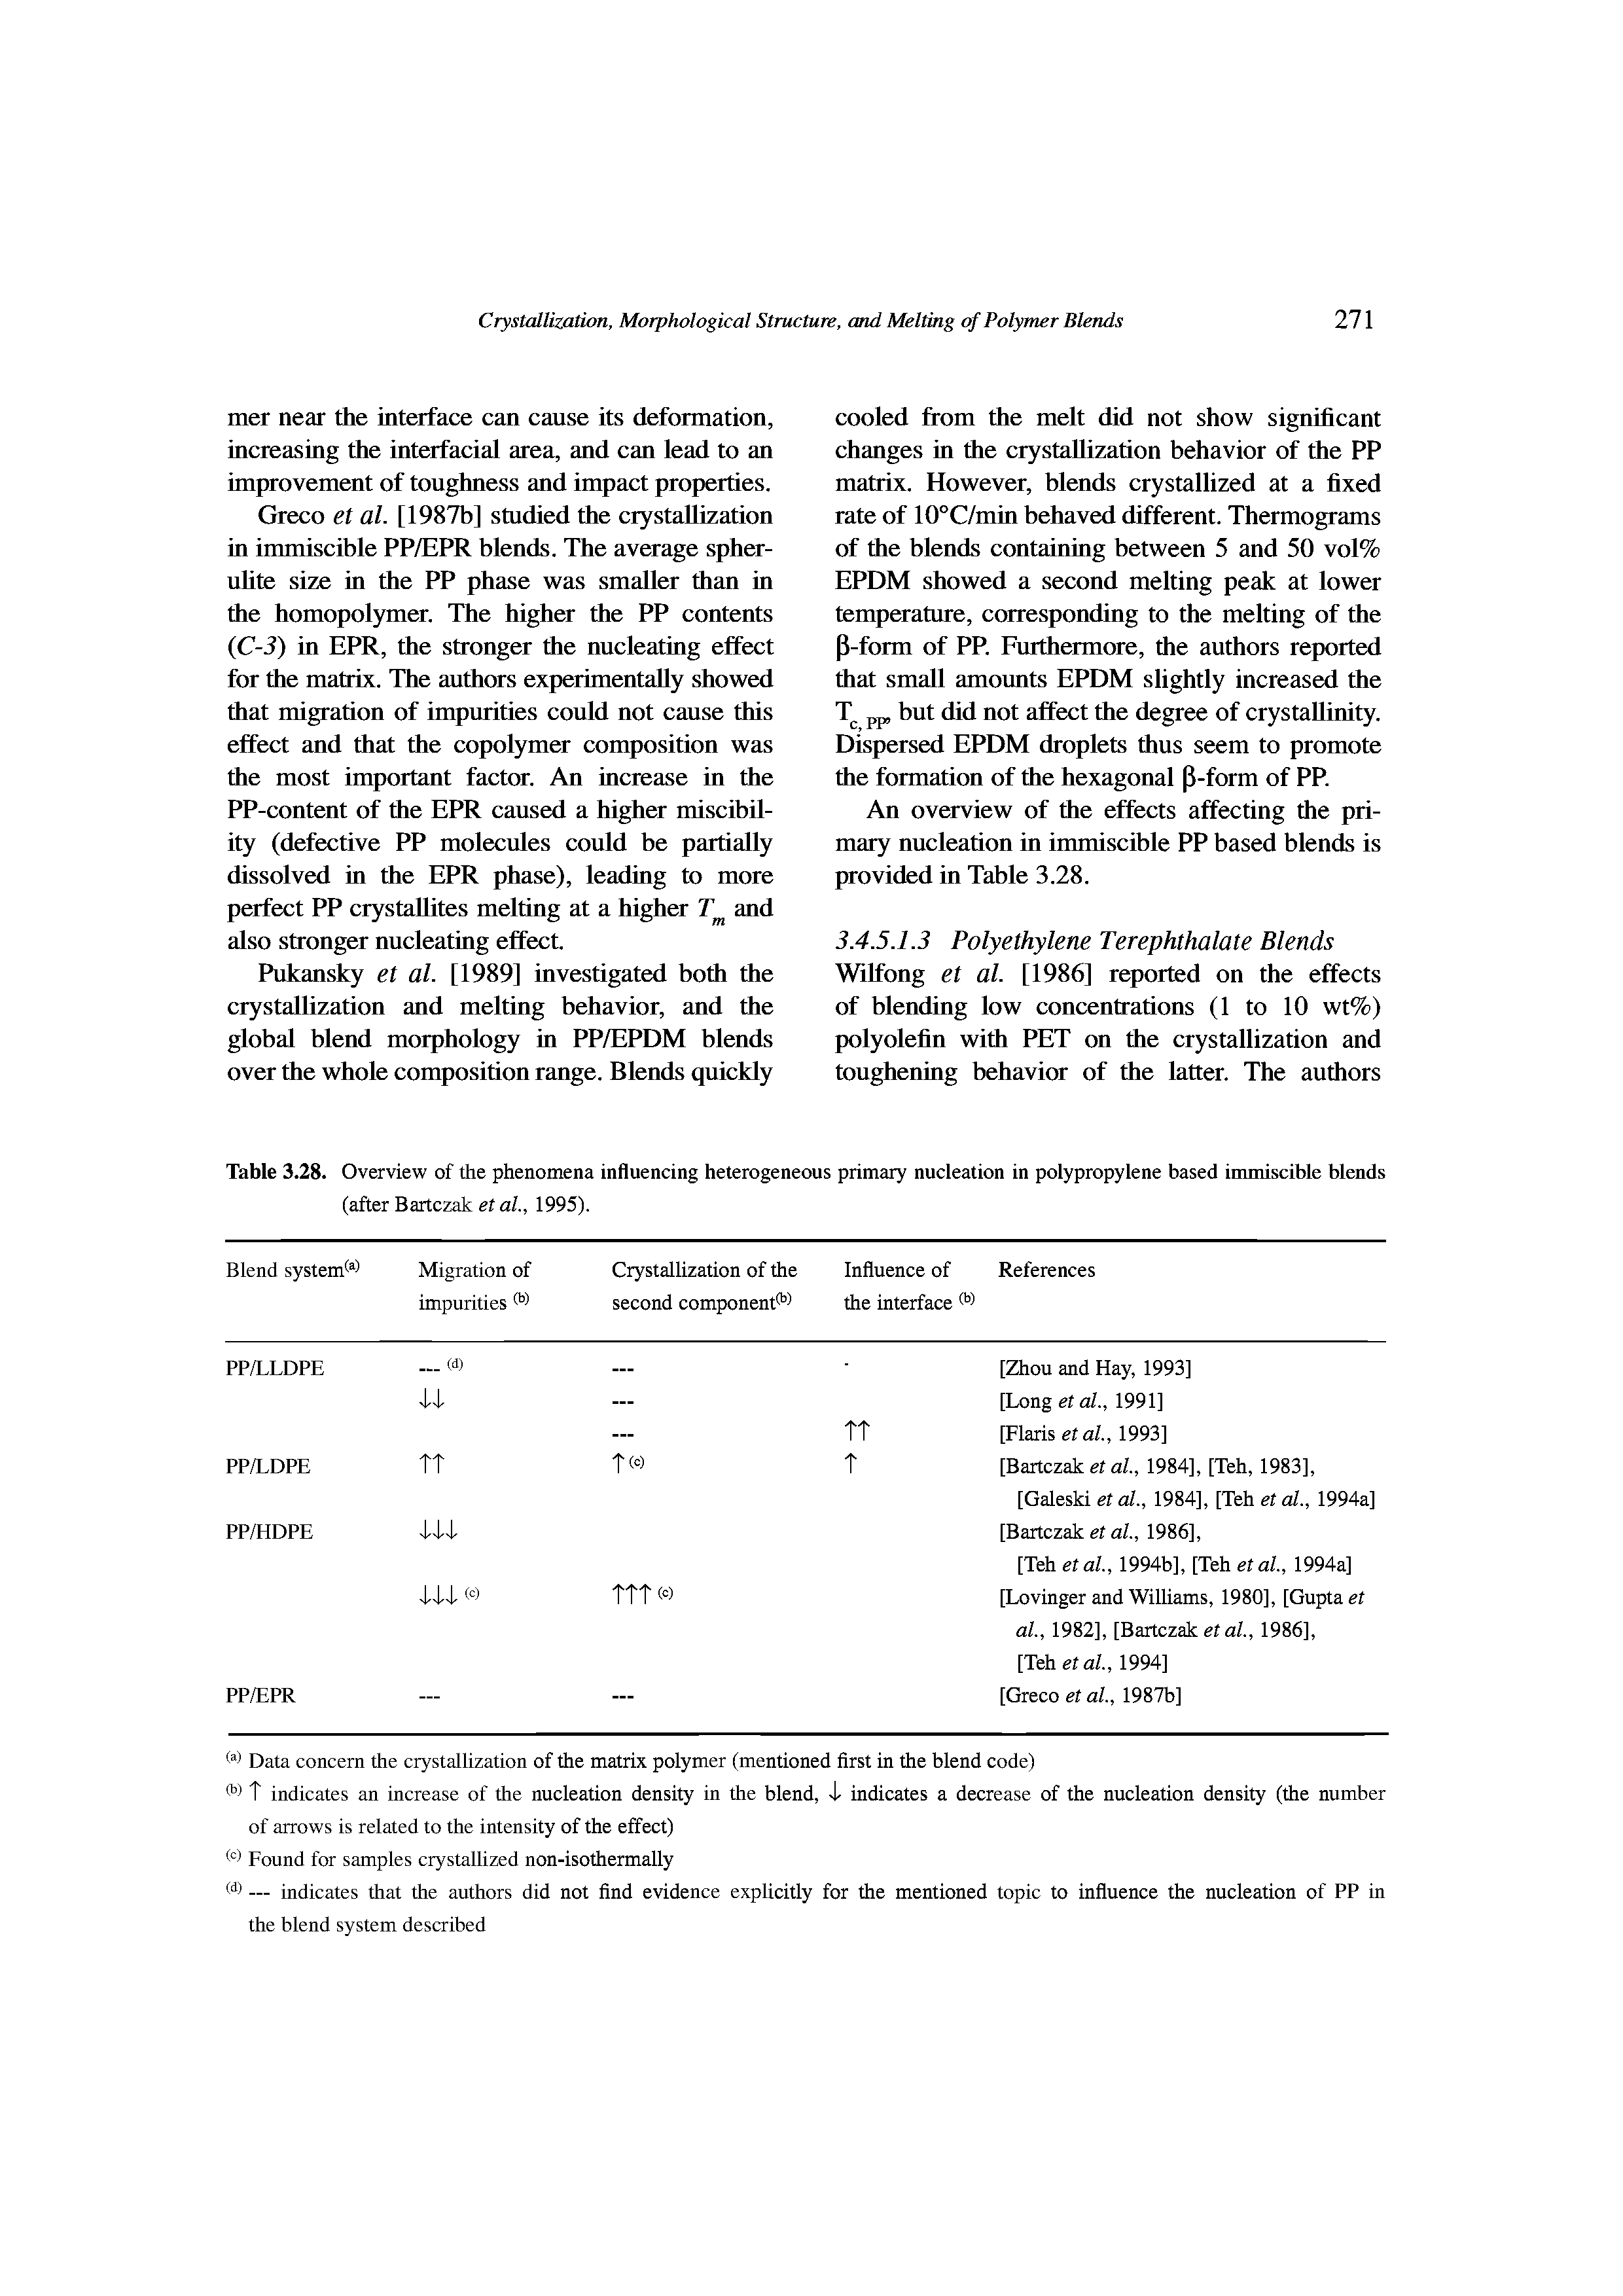 Table 3.28. Overview of the phenomena influencing heterogeneous primary nucleation in polypropylene based immiscible blends (after Bartczak et al., 1995).